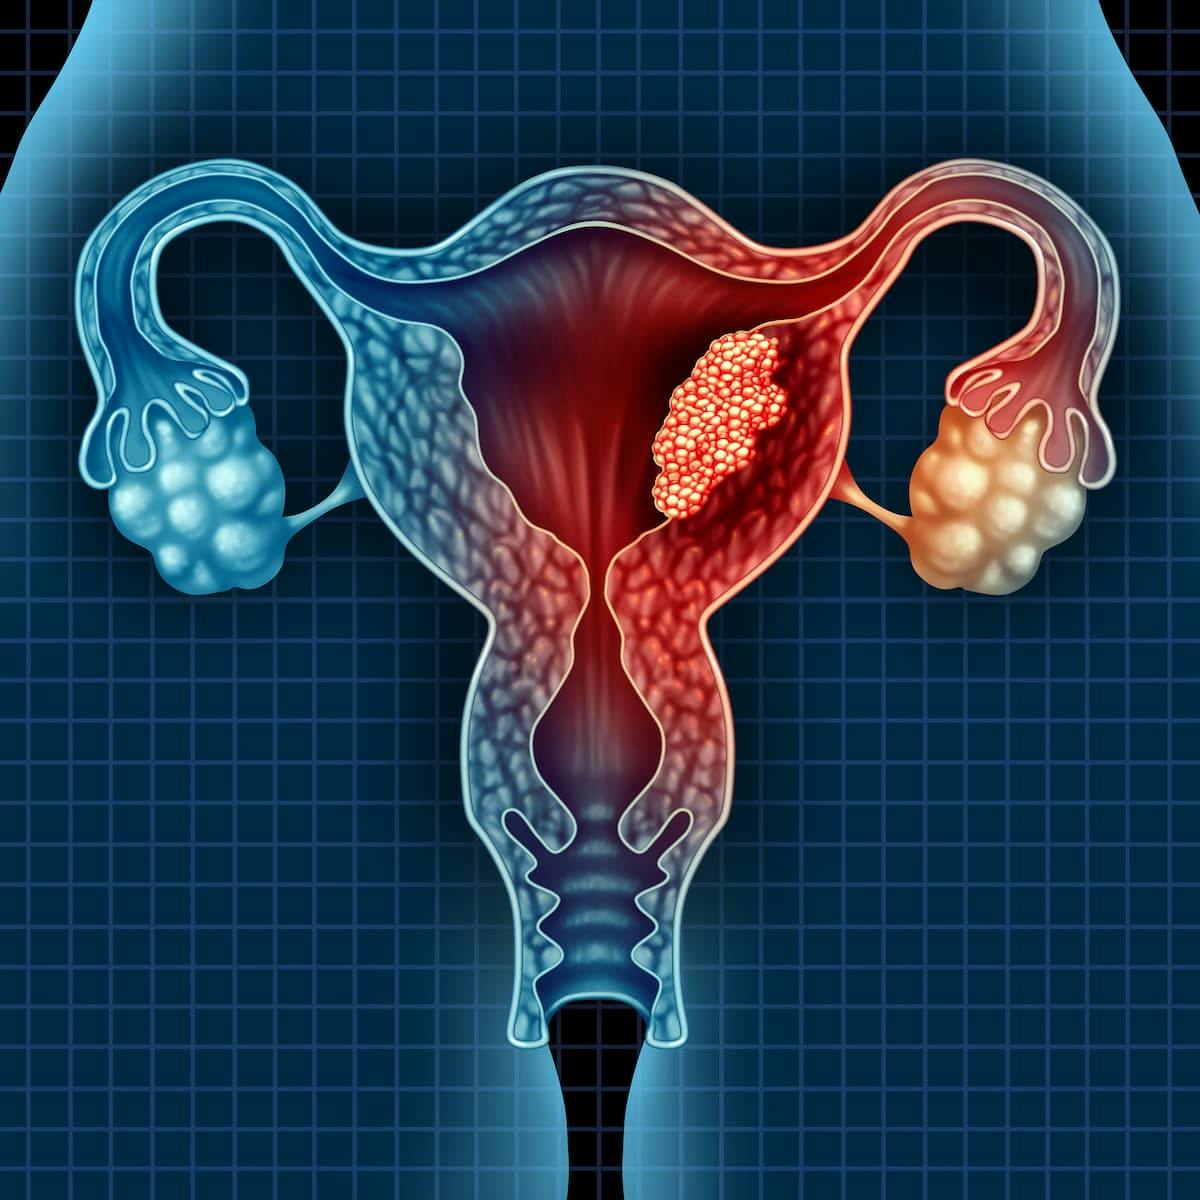 DB-1303, an investigational third generation antibody-drug conjugate that now has FDA fast track designation, may benefit patients with HER2-overexpressing endometrial cancer.